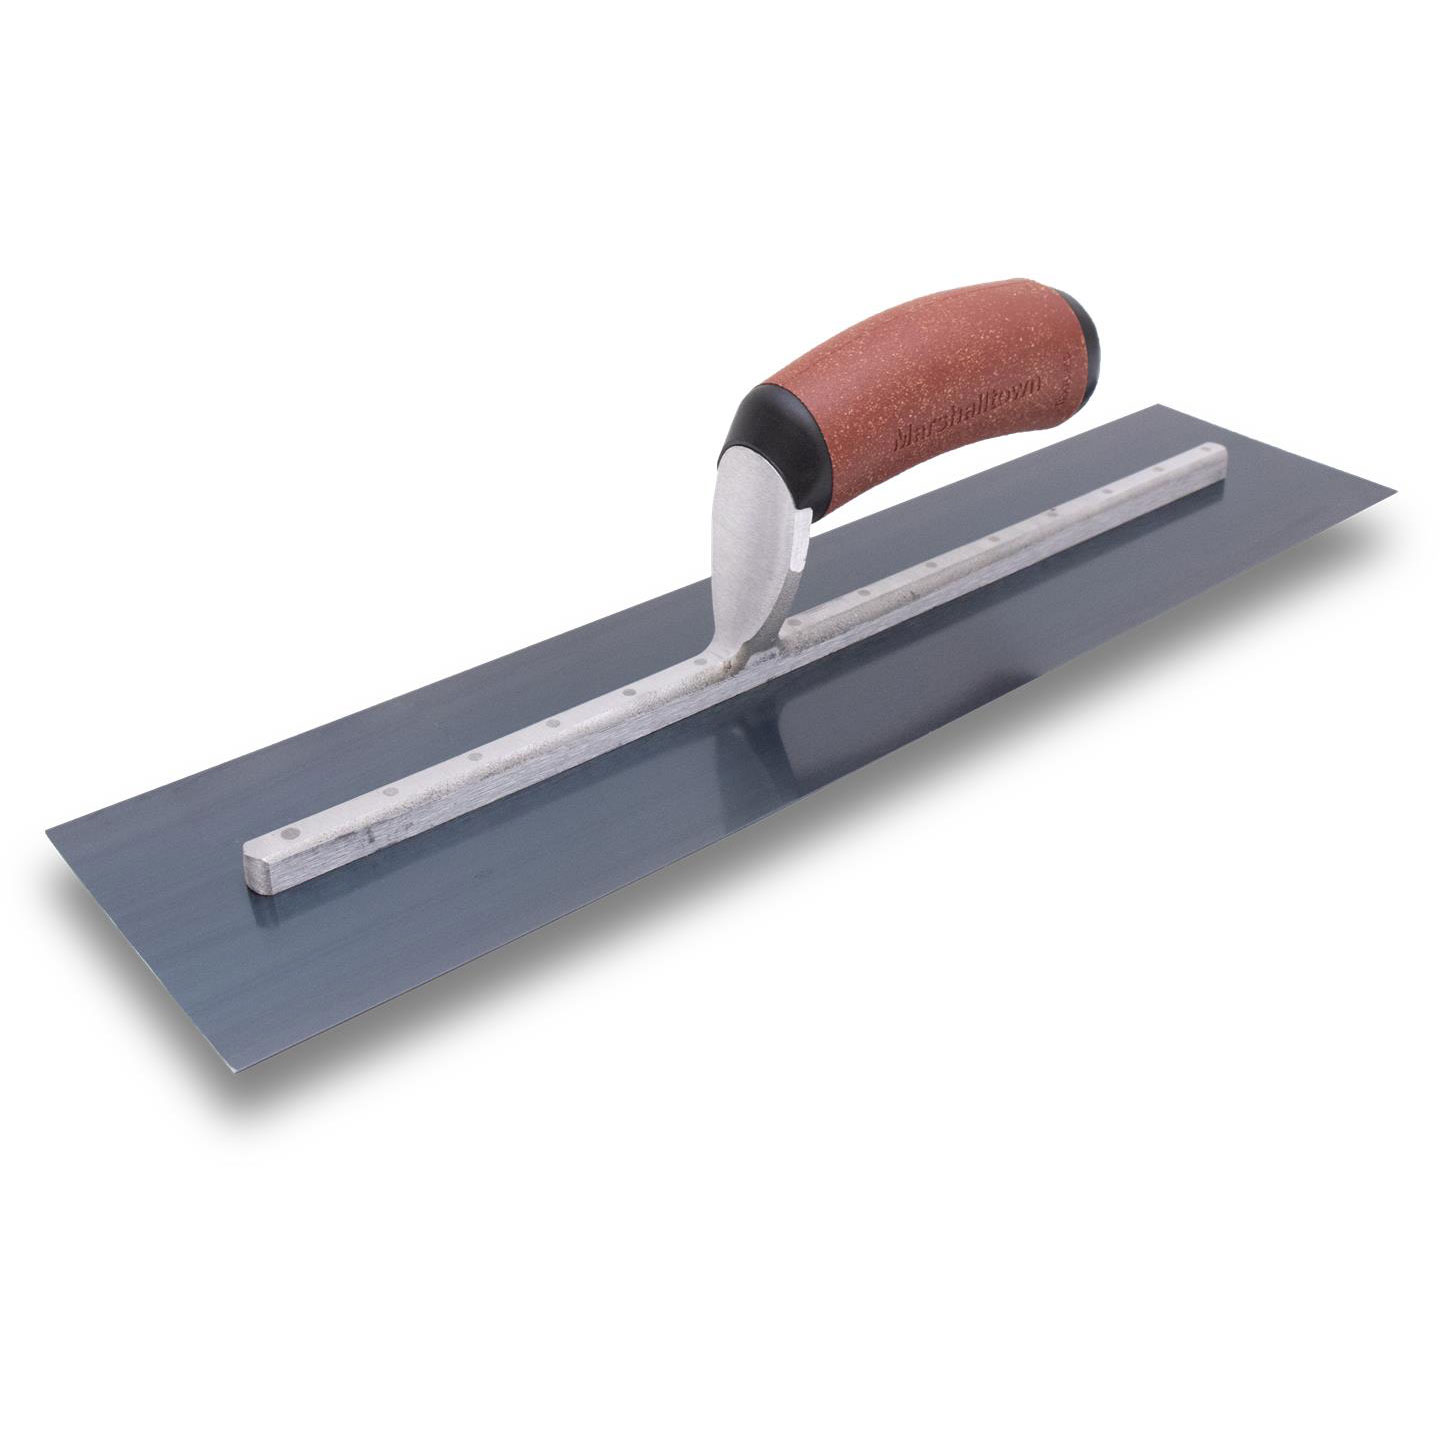 Marshalltown MXS81BDC 18in x 4in Blue Steel Finishing Trowel with DuraCork Handle MXS81BDC